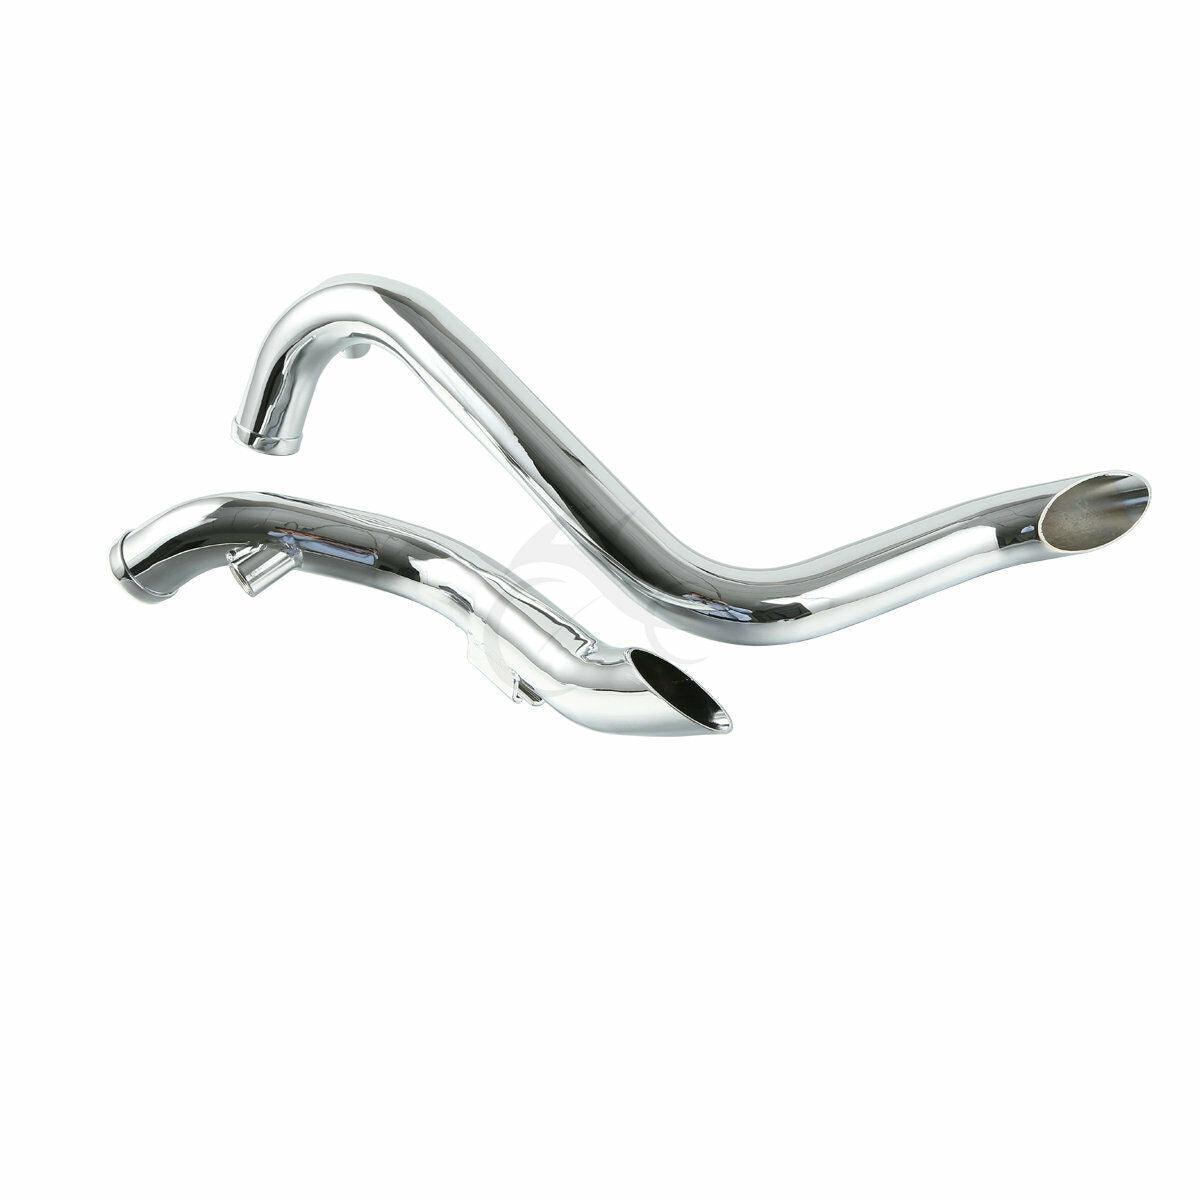 1.75" Drag Pipes Exhaust Fit For Harley Touring Sportster883 1200 Softail Dyna - Moto Life Products